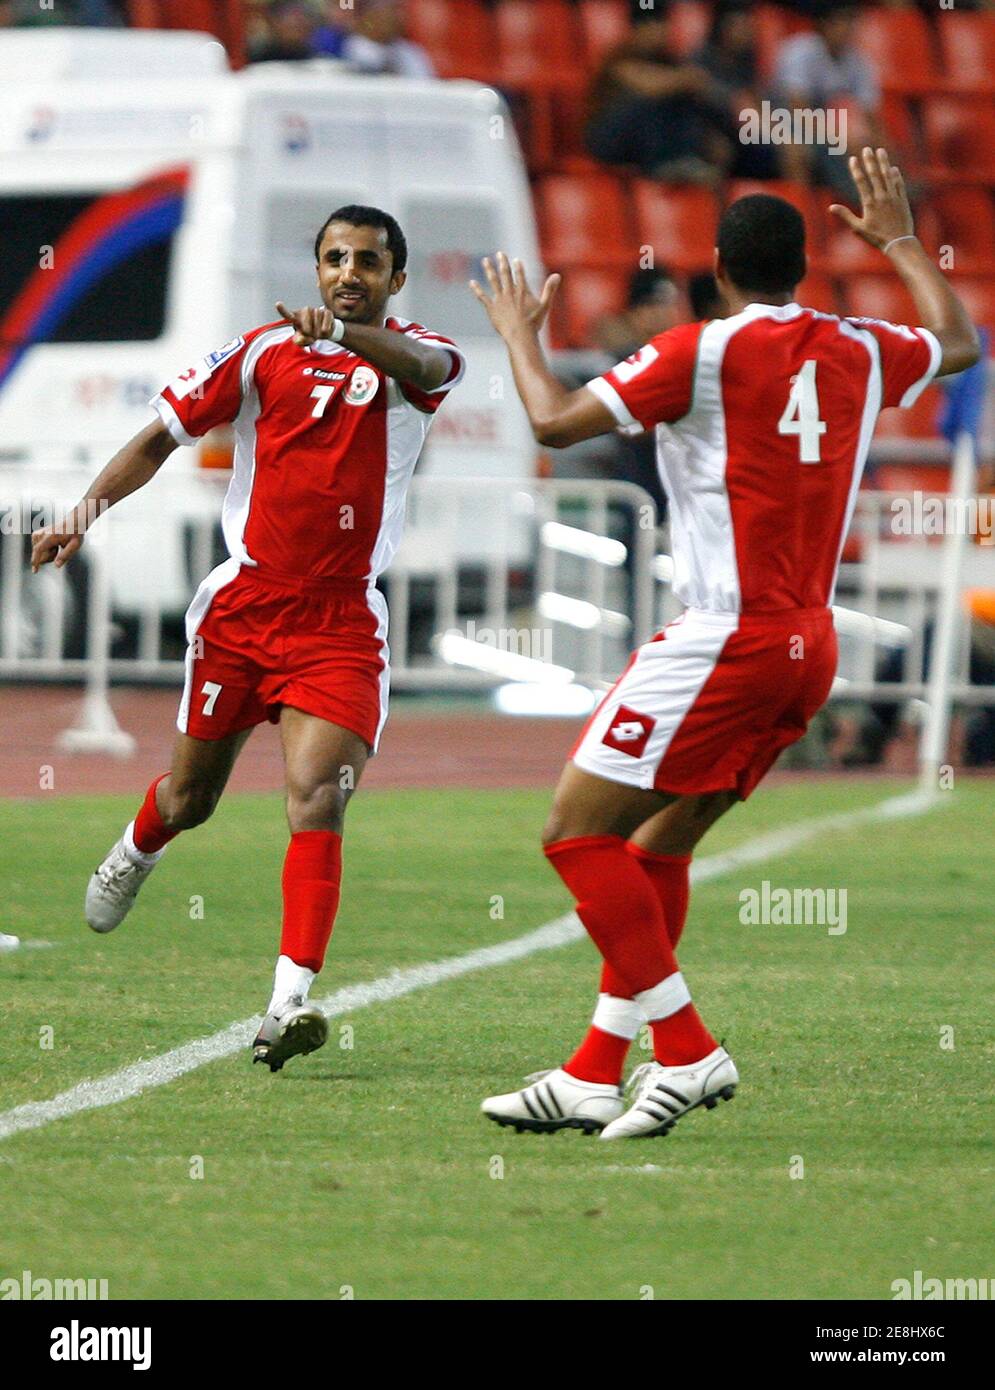 Oman's Ismail Sulaiman Al-Ajmi (L) celebrates with teammate Khuhfa Ayil Salim Al Naufh (4) after scoring a goal against Thailand during their 2010 World Cup qualifying soccer match in Bangkok March 26, 2008. REUTERS/Chaiwat Subprasom   (THAILAND) Stock Photo